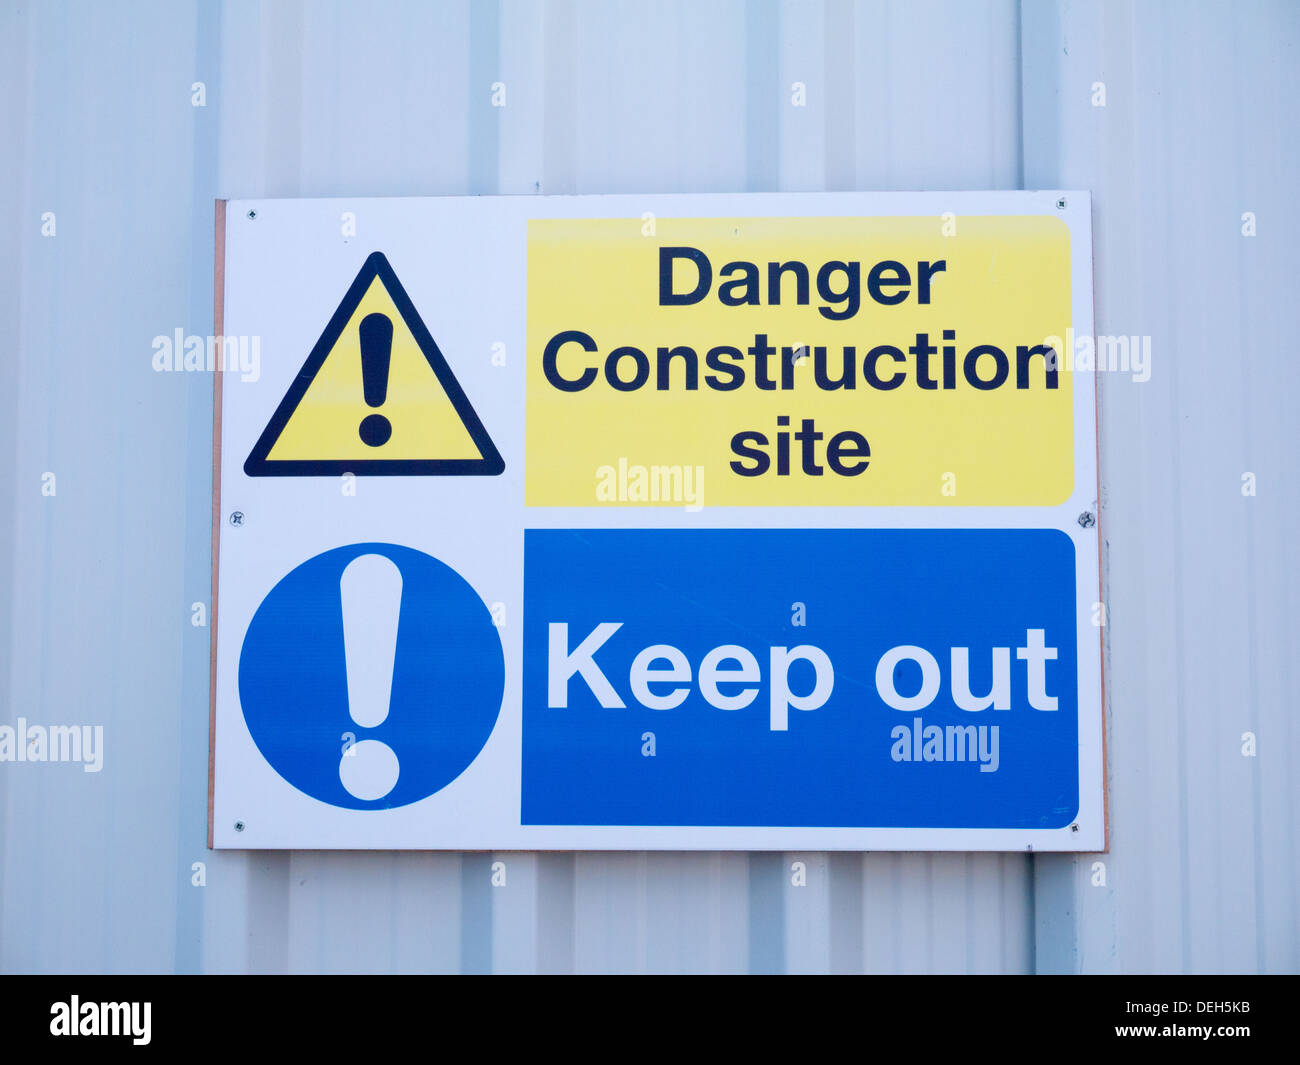 Danger Construction Site, Keep Out sign at a building construction site. Stock Photo